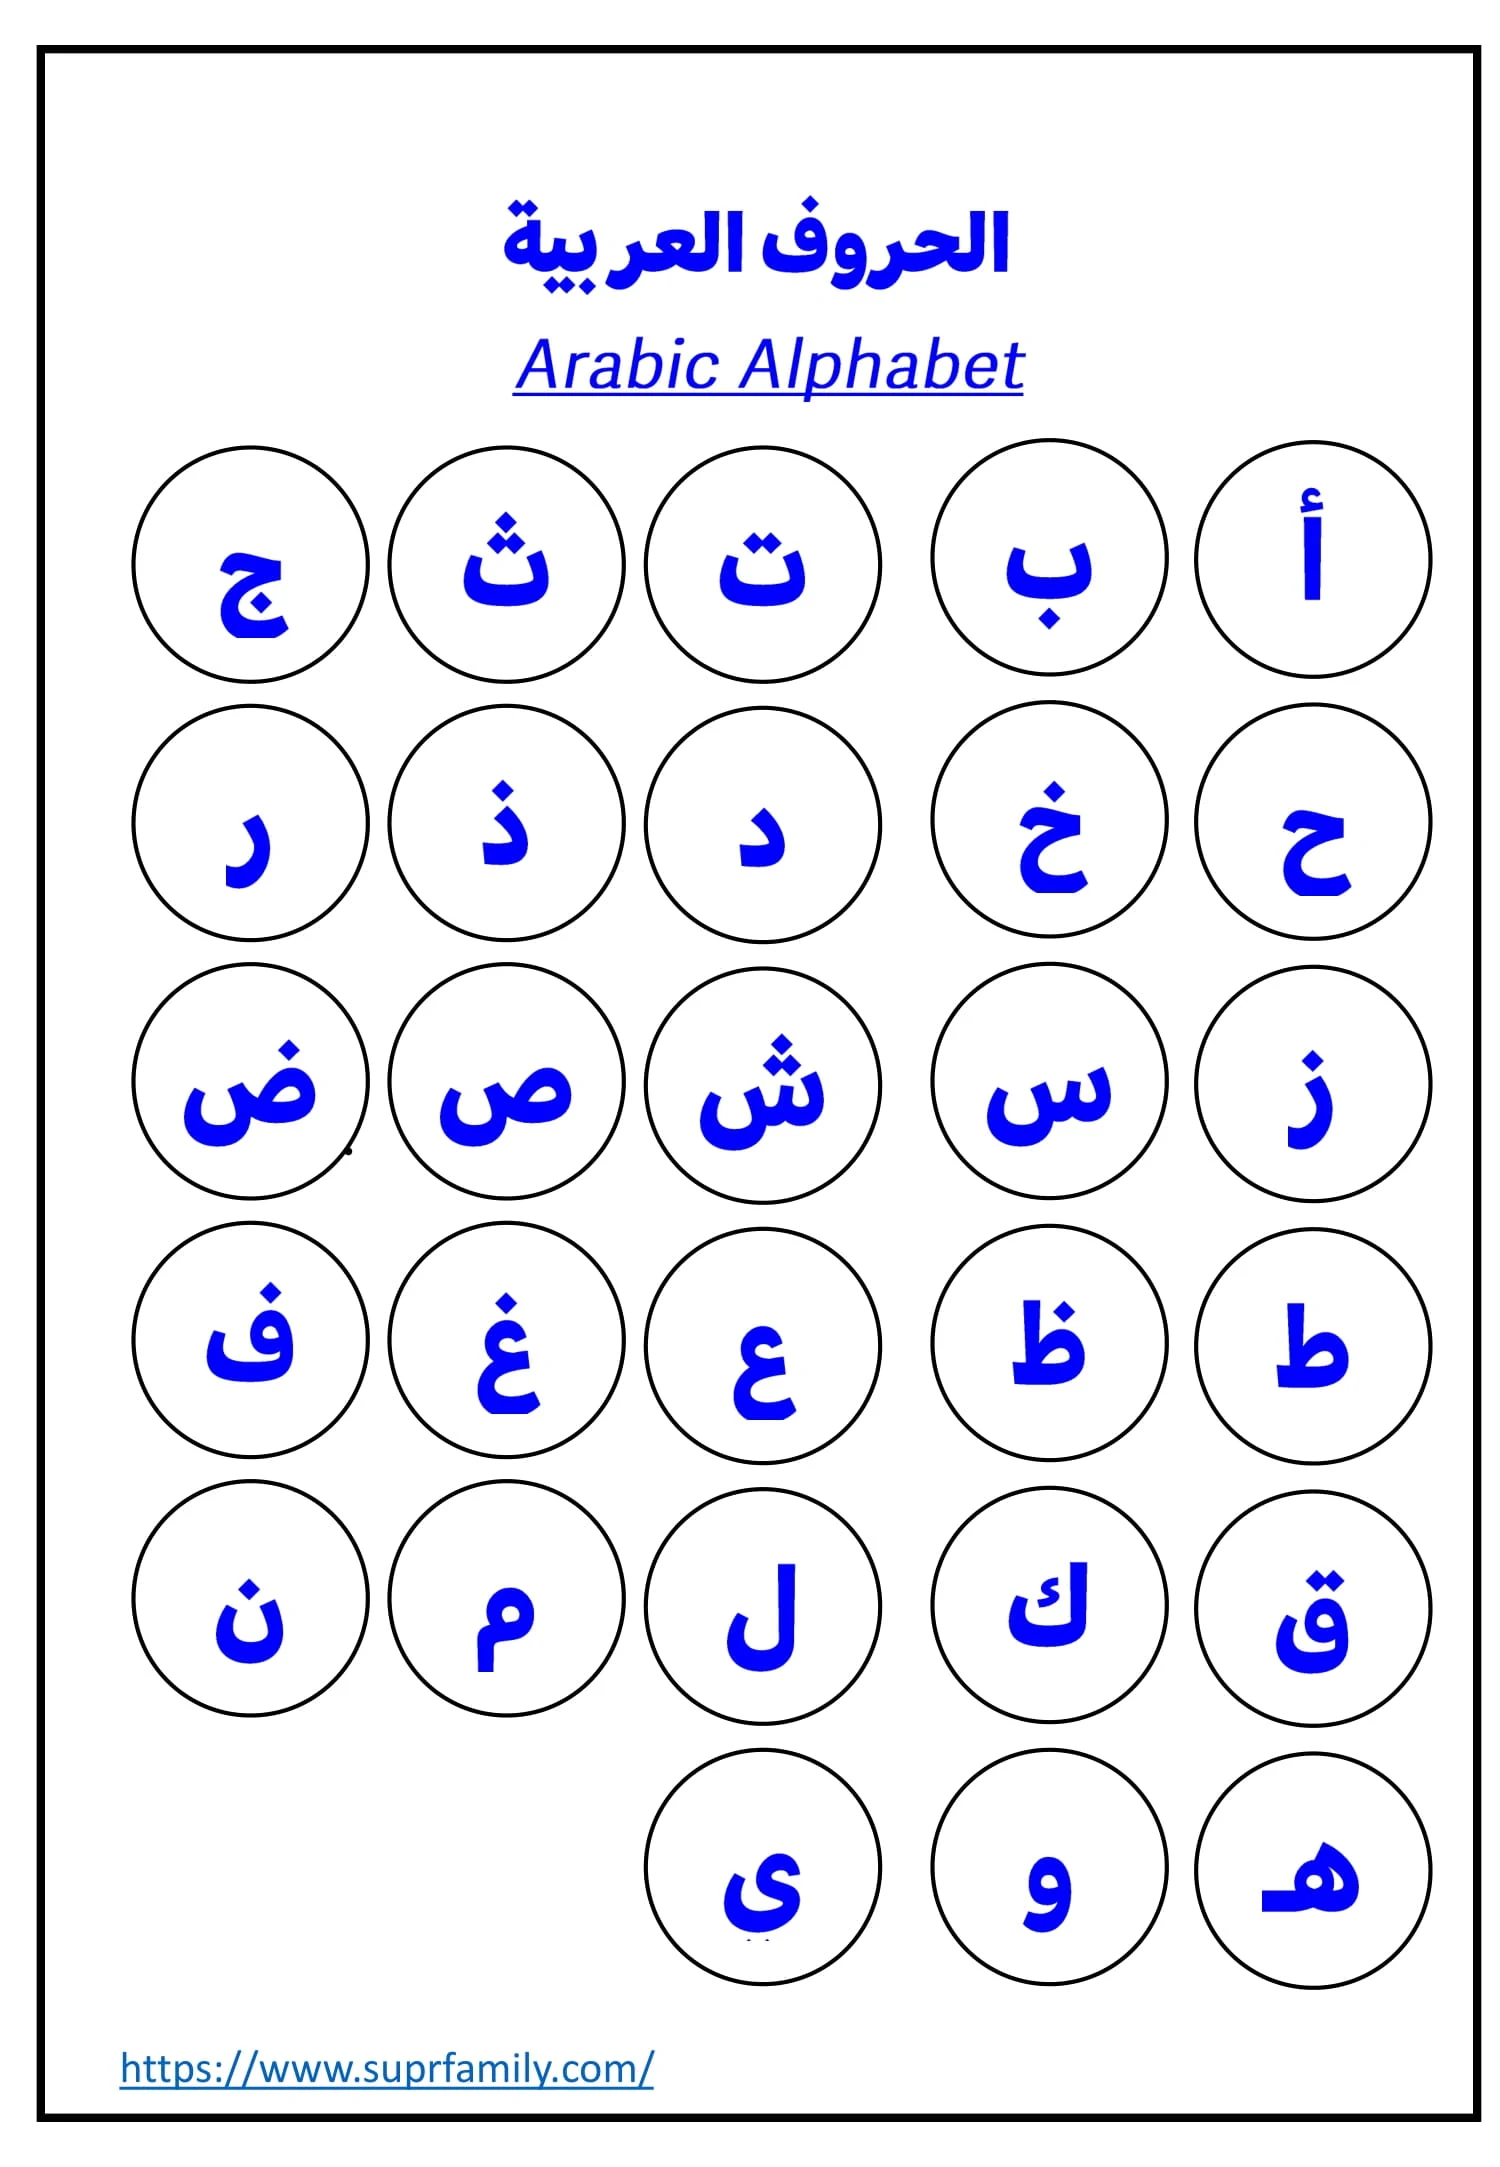 The Arabic Alphabet PDF- Free Download for Printing - Direct Link